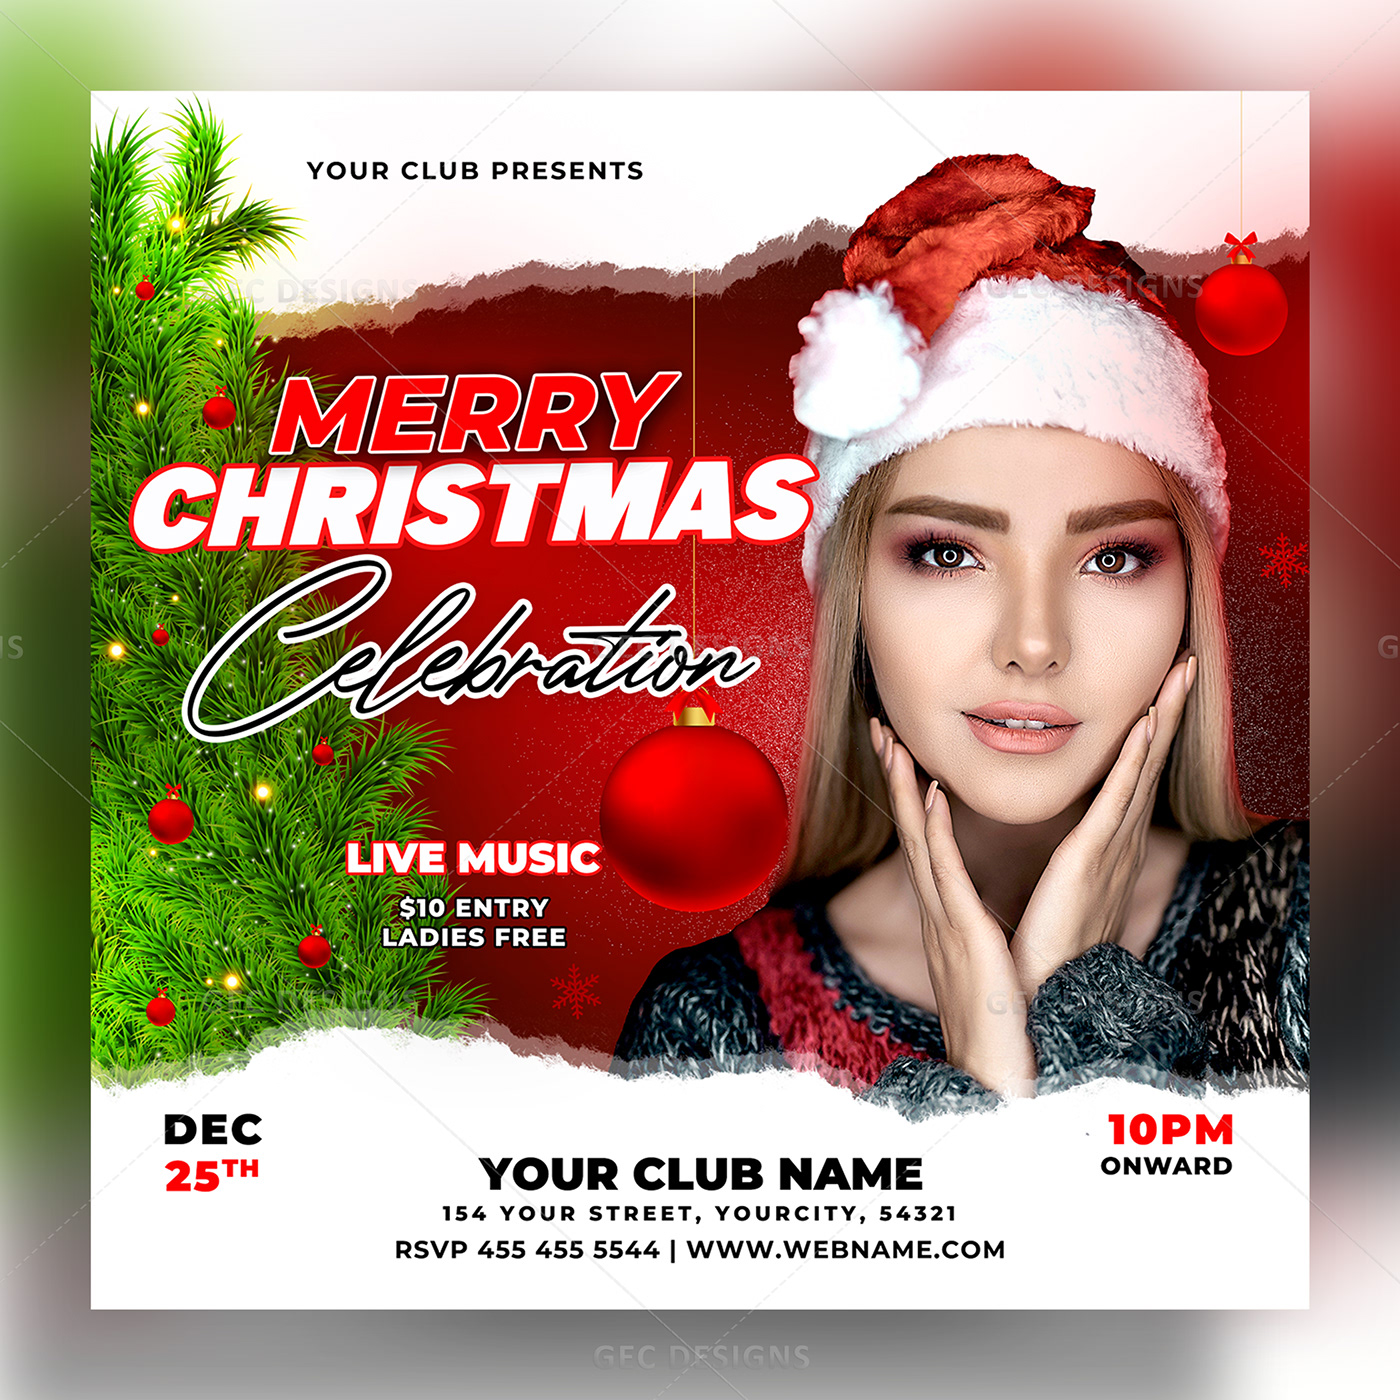 This is a Christmas celebration party flyer template .